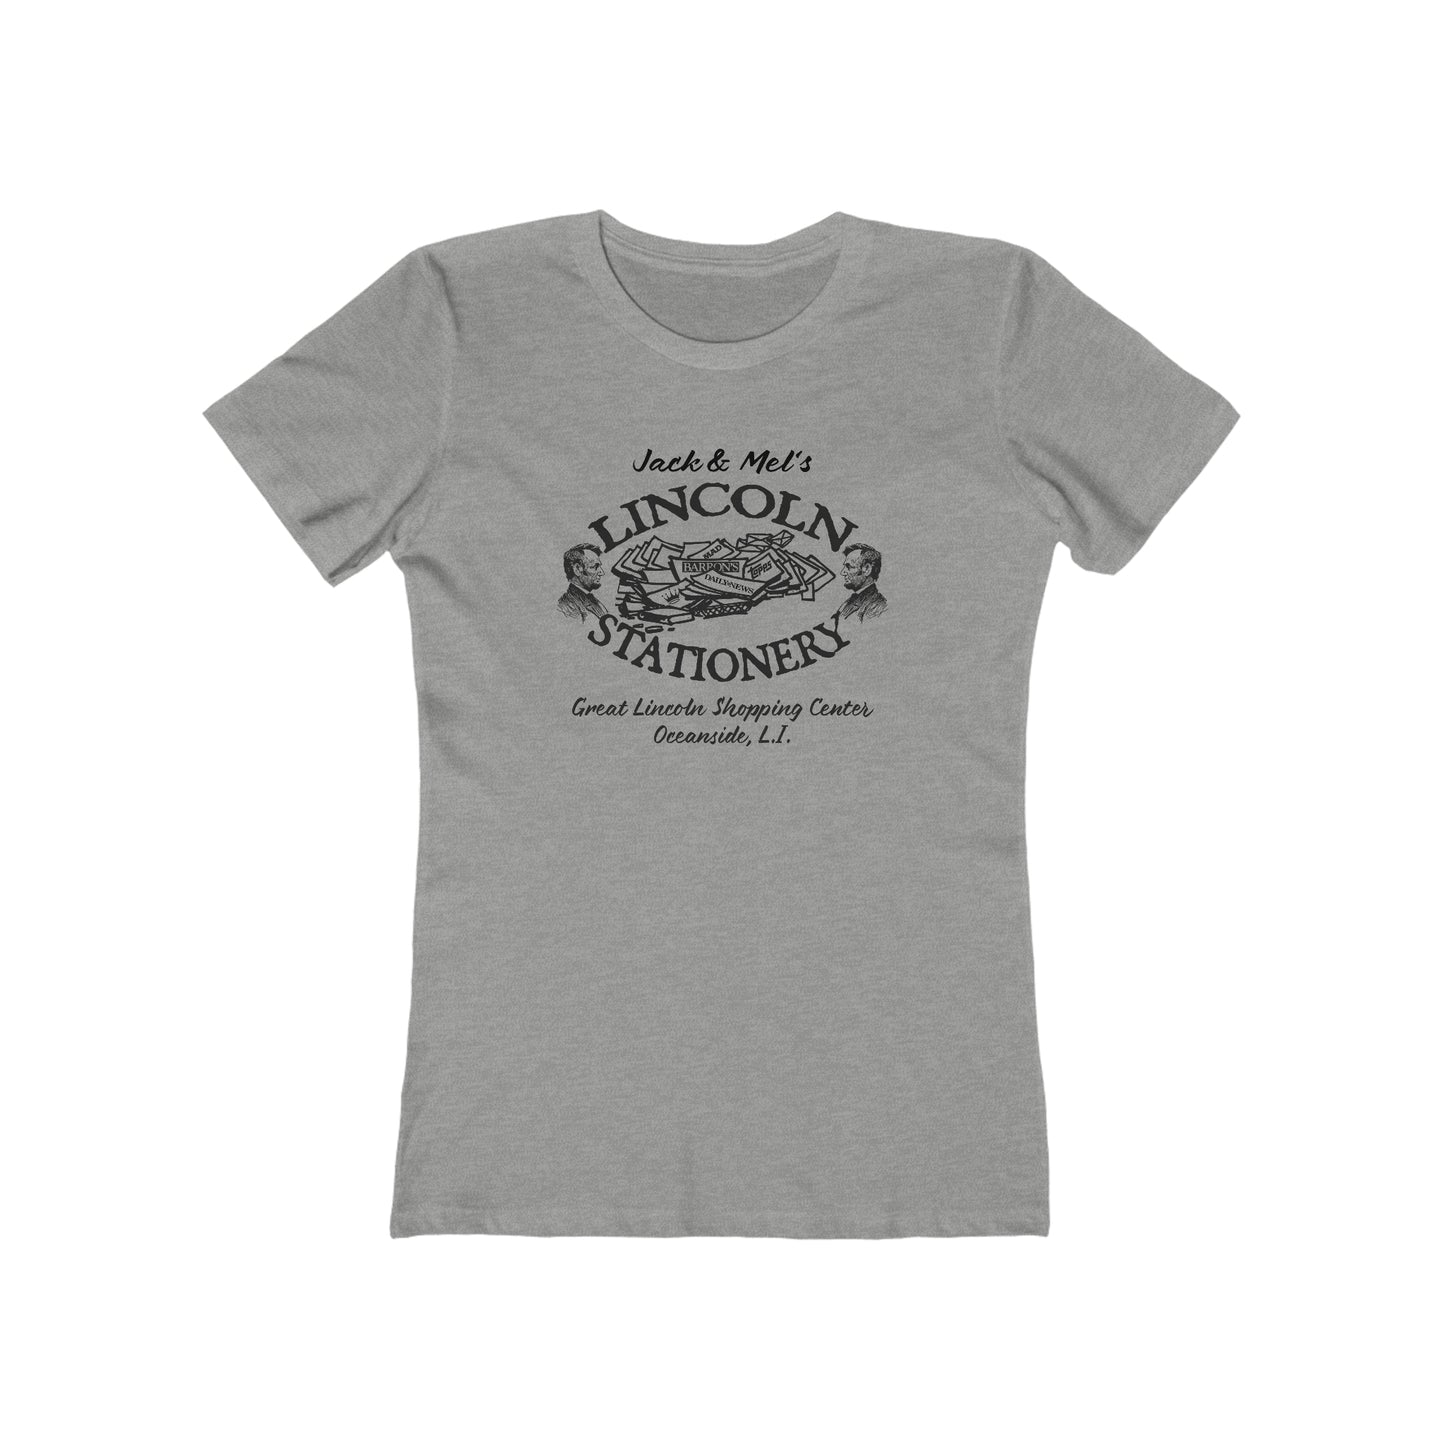 Lincoln Stationery - Women's T-Shirt